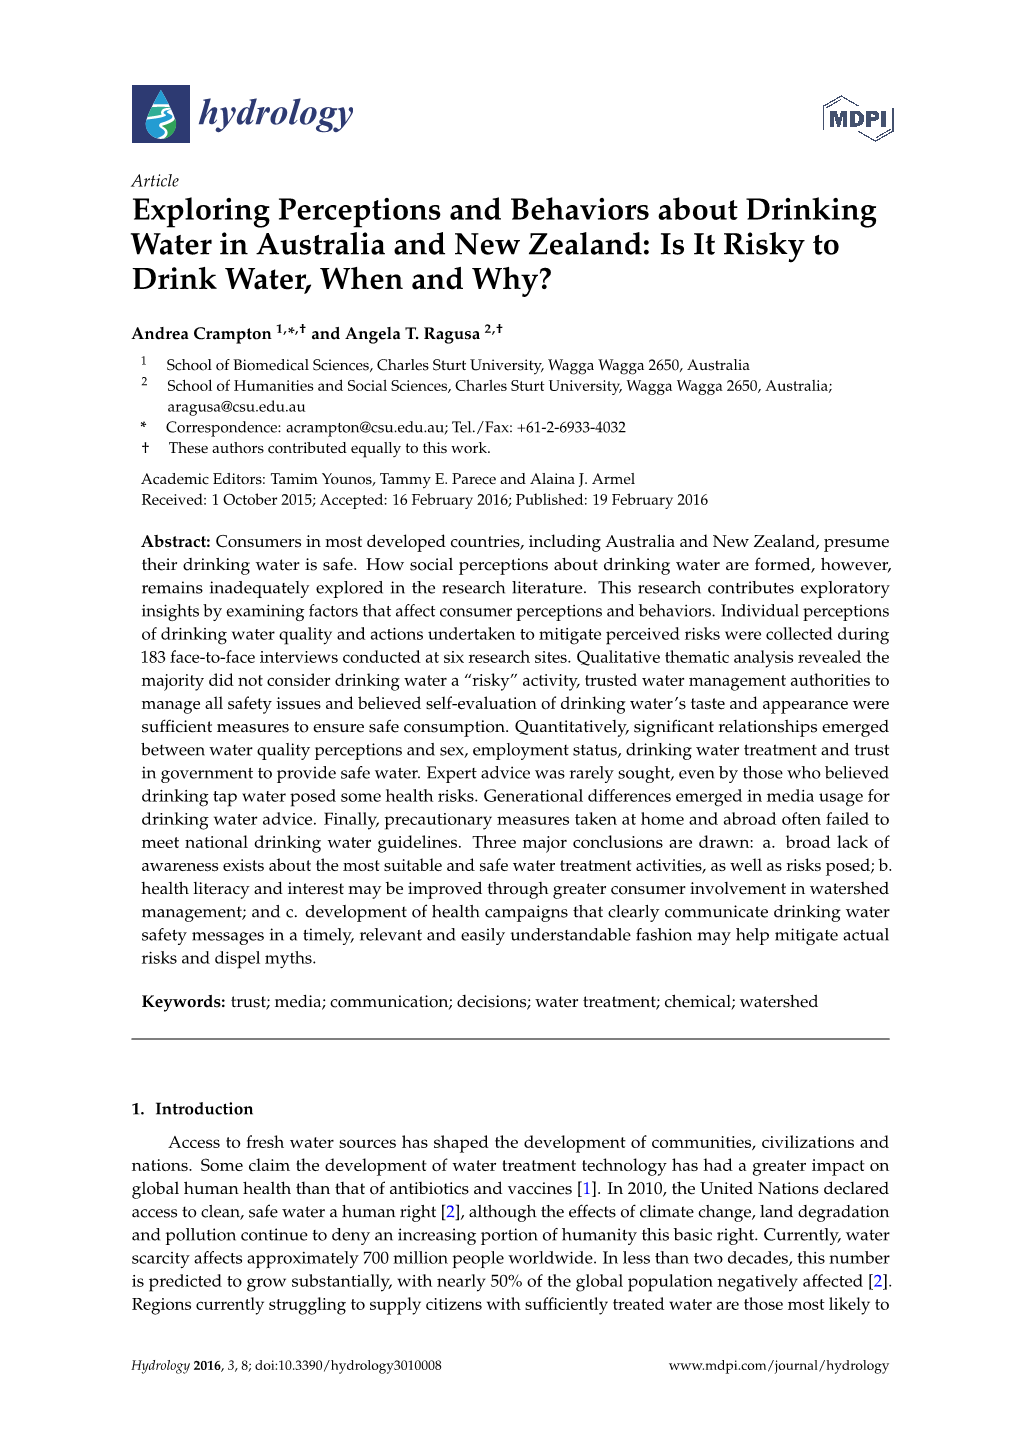 Exploring Perceptions and Behaviors About Drinking Water in Australia and New Zealand: Is It Risky to Drink Water, When and Why?